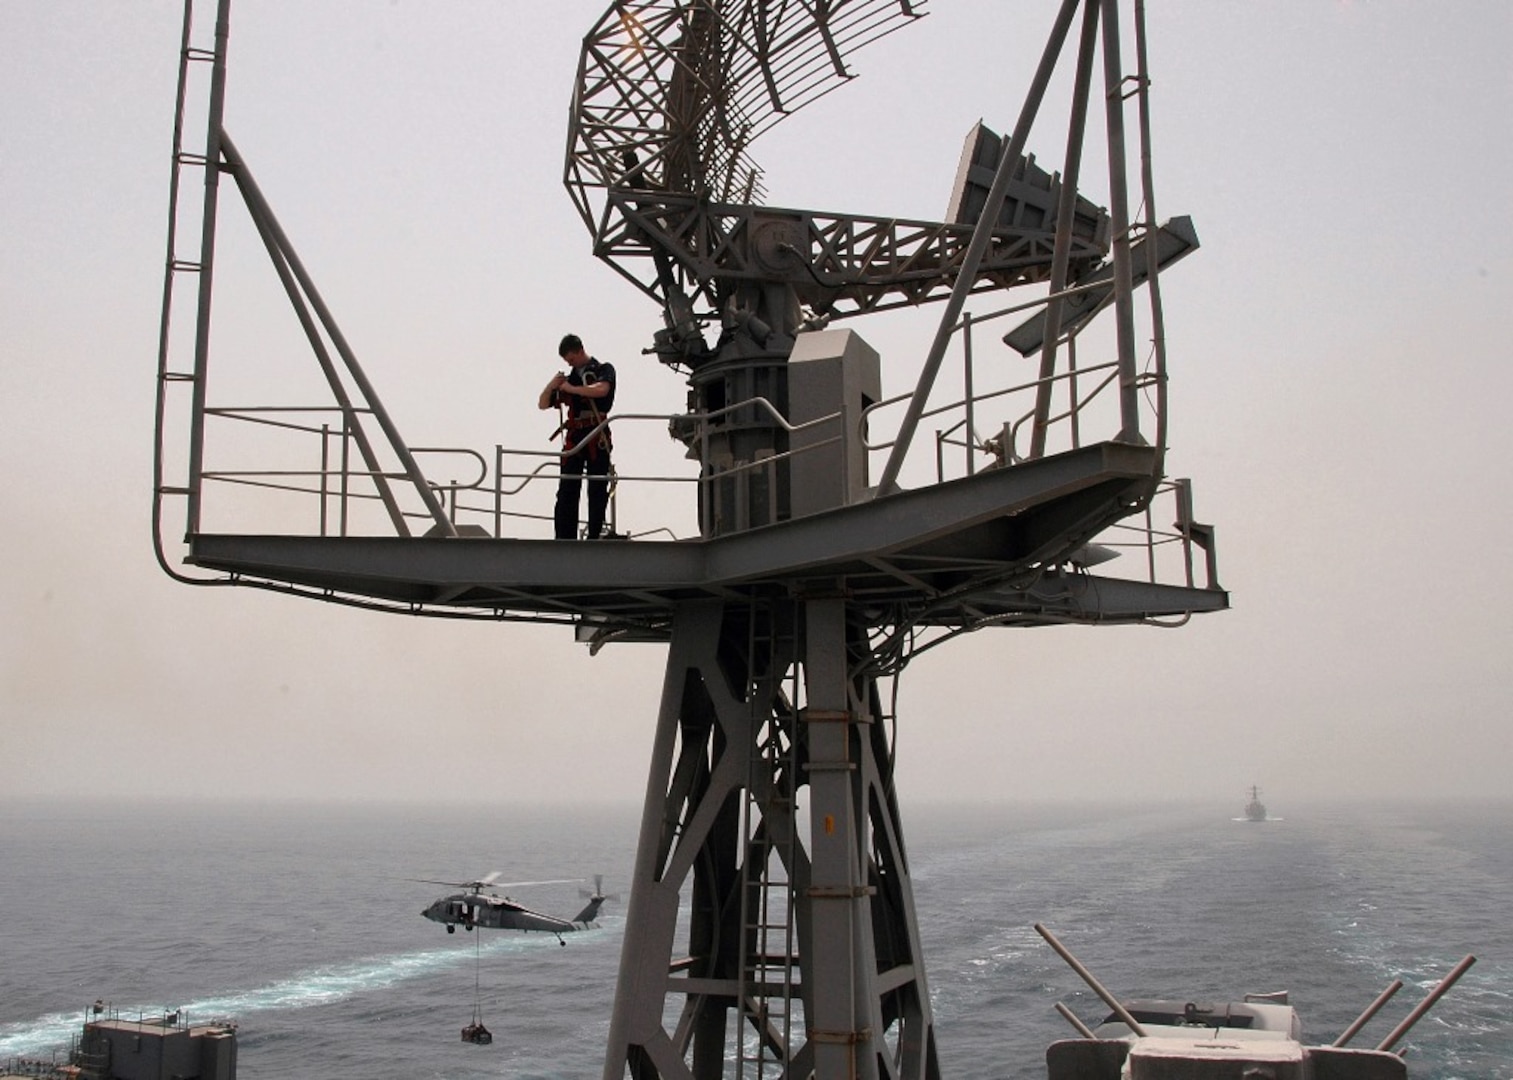 IMAGE: 080508-N-9450M-096  ARABIAN GULF (May 8, 2008)- ARABIAN GULF Electronics Technician 3rd Class Michael Isenmann prepares to work on an SPS-49 radar antenna aboard Nimitz-class aircraft carrier USS Abraham Lincoln (CVN 72).  Lincoln is deployed to the U.S. Navy 5th Fleet area of responsibility to support Maritime Security Operations (MSO).  MSO help develop security in the maritime environment, which promotes stability and global prosperity.  These operations complement the counterterrorism and security efforts of regional nations and seek to disrupt violent extremists' use of the maritime environment as a venue for attack or to transport personnel, weapons or other material.  U.S. Navy Photo by MC3 Johndion Magsipoc (Released).